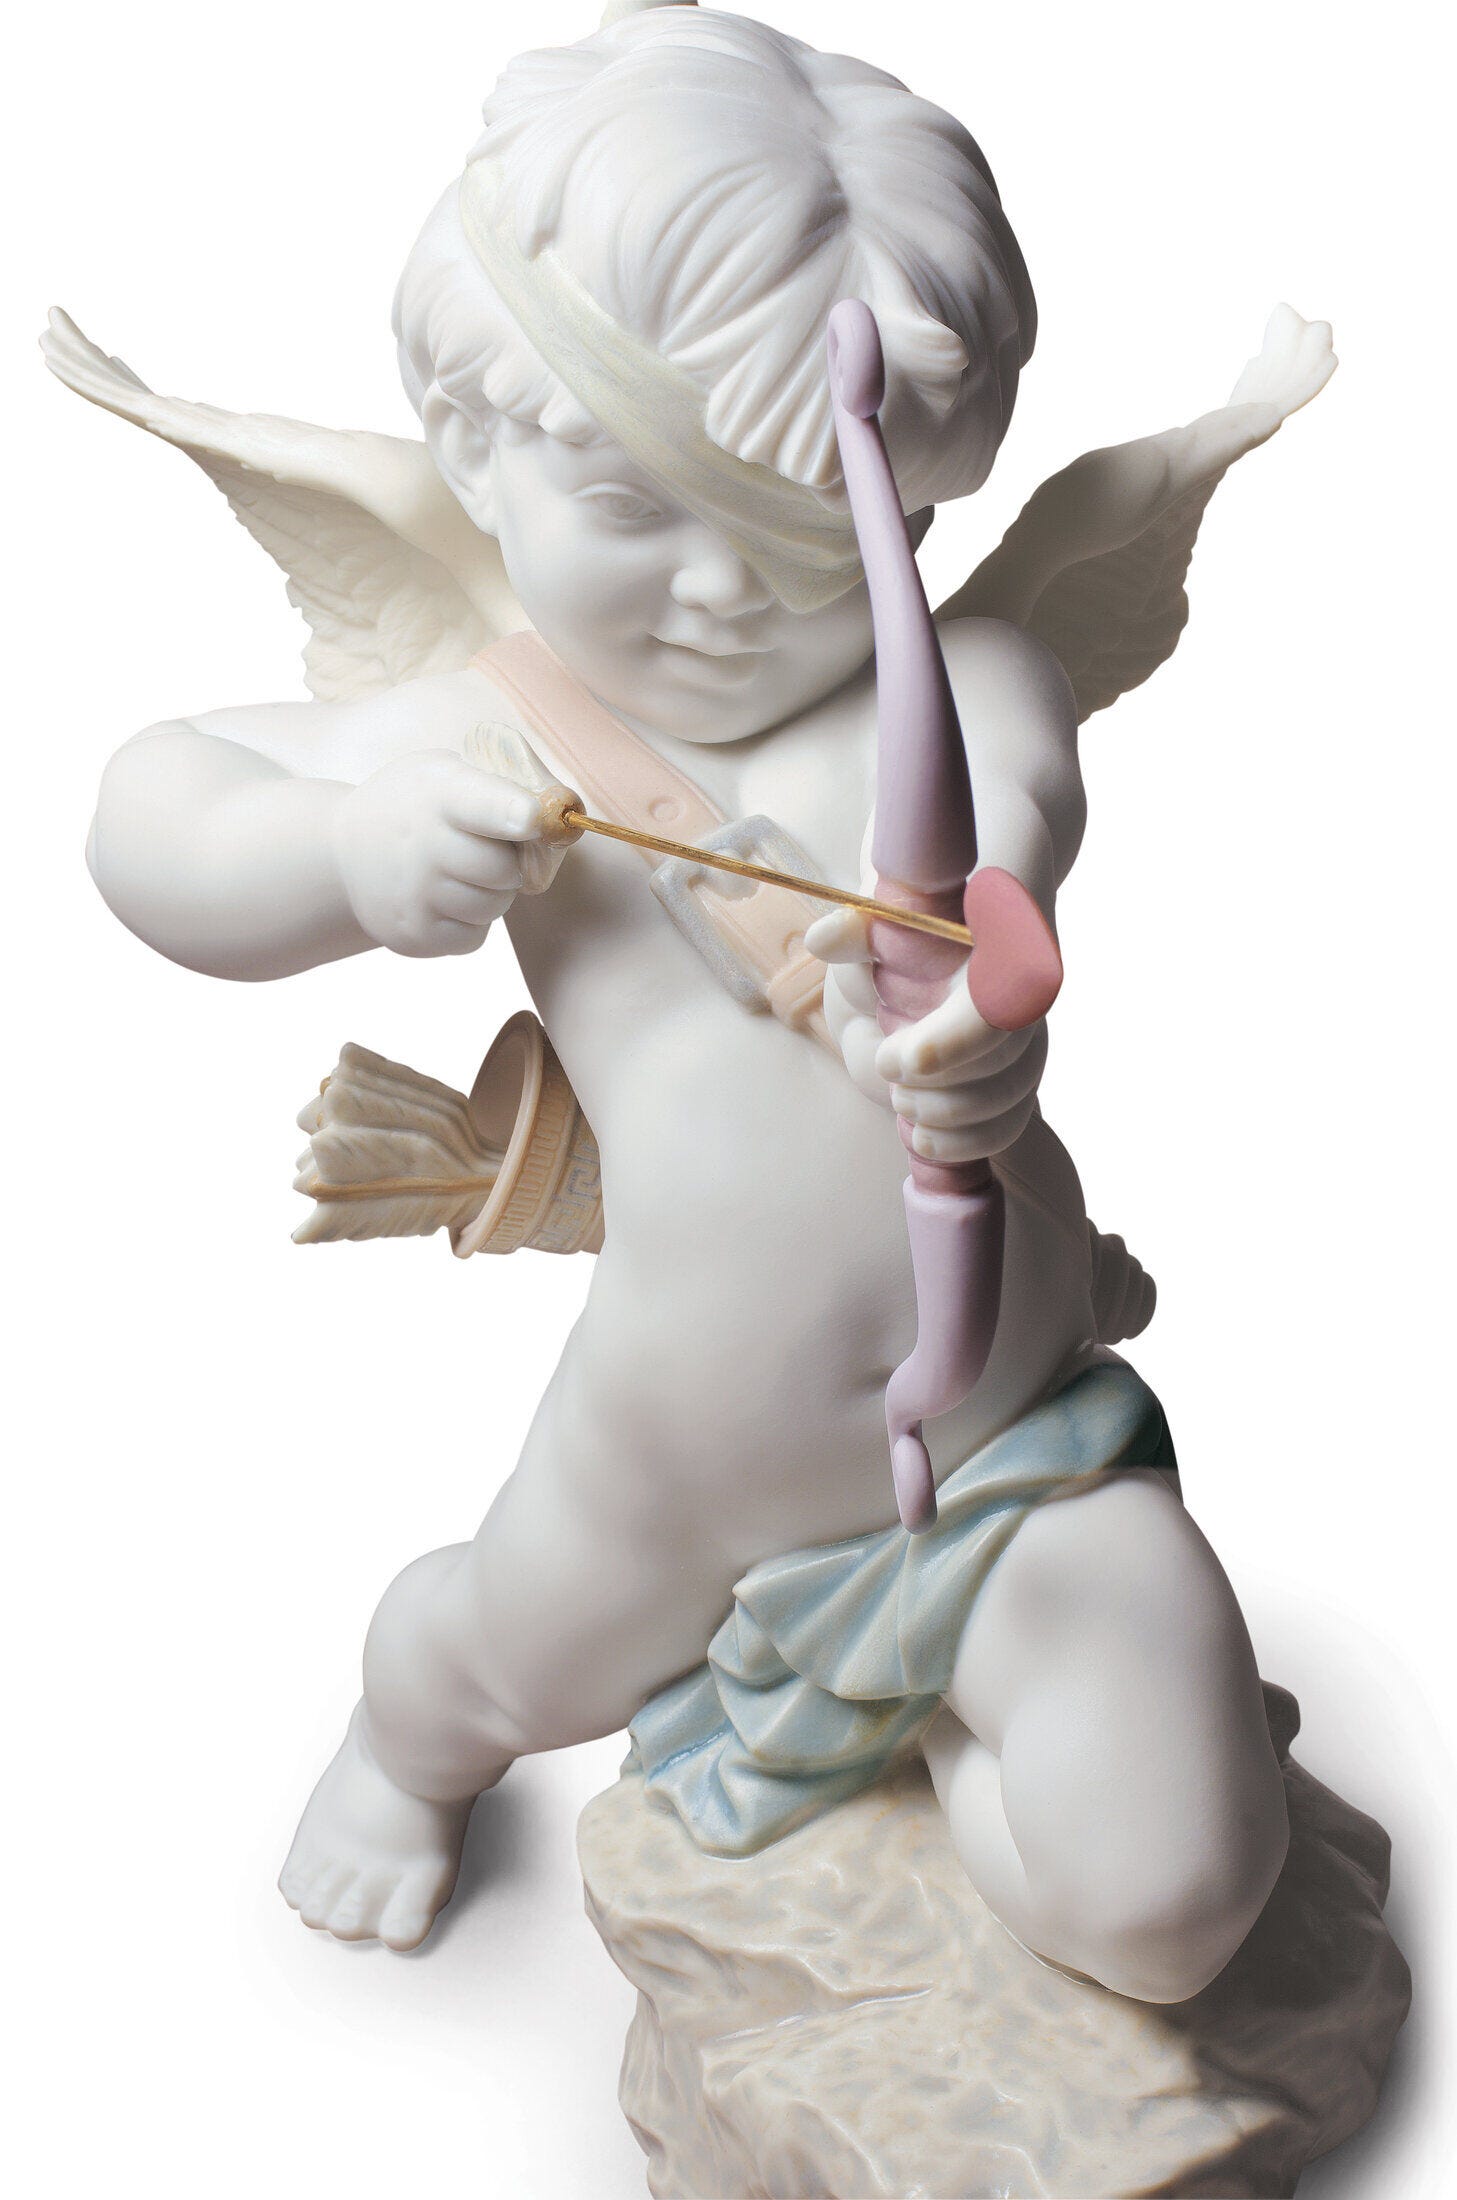 Close To My Heart 1989-97 Lladro Porcelain Figurine